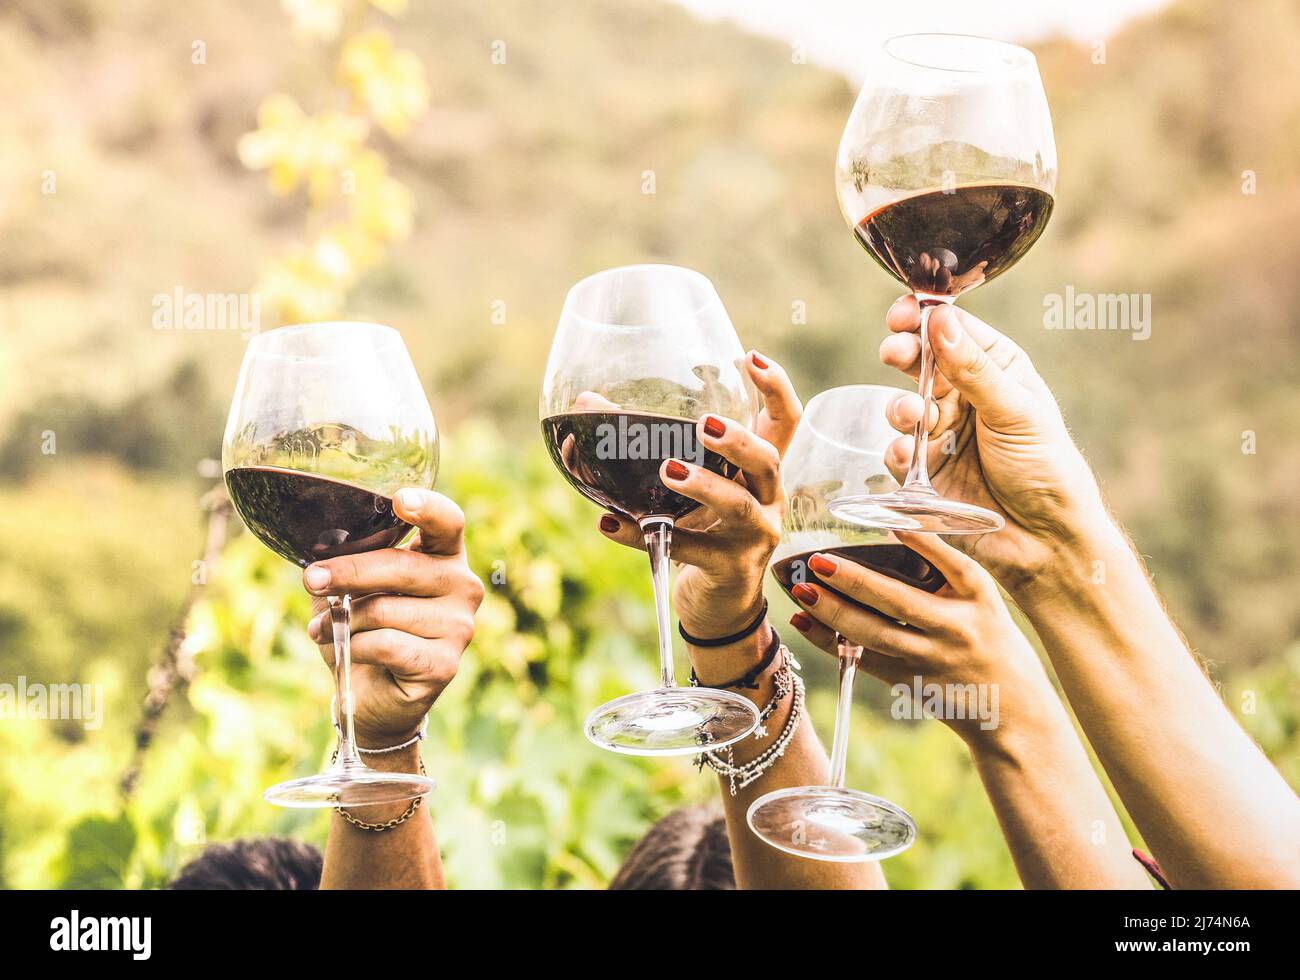 https://c8.alamy.com/comp/2J74N6A/hands-toasting-red-wine-glass-and-friends-having-fun-cheering-at-winetasting-experience-young-people-enjoying-harvest-time-together-at-farmhouse-vin-2J74N6A.jpg